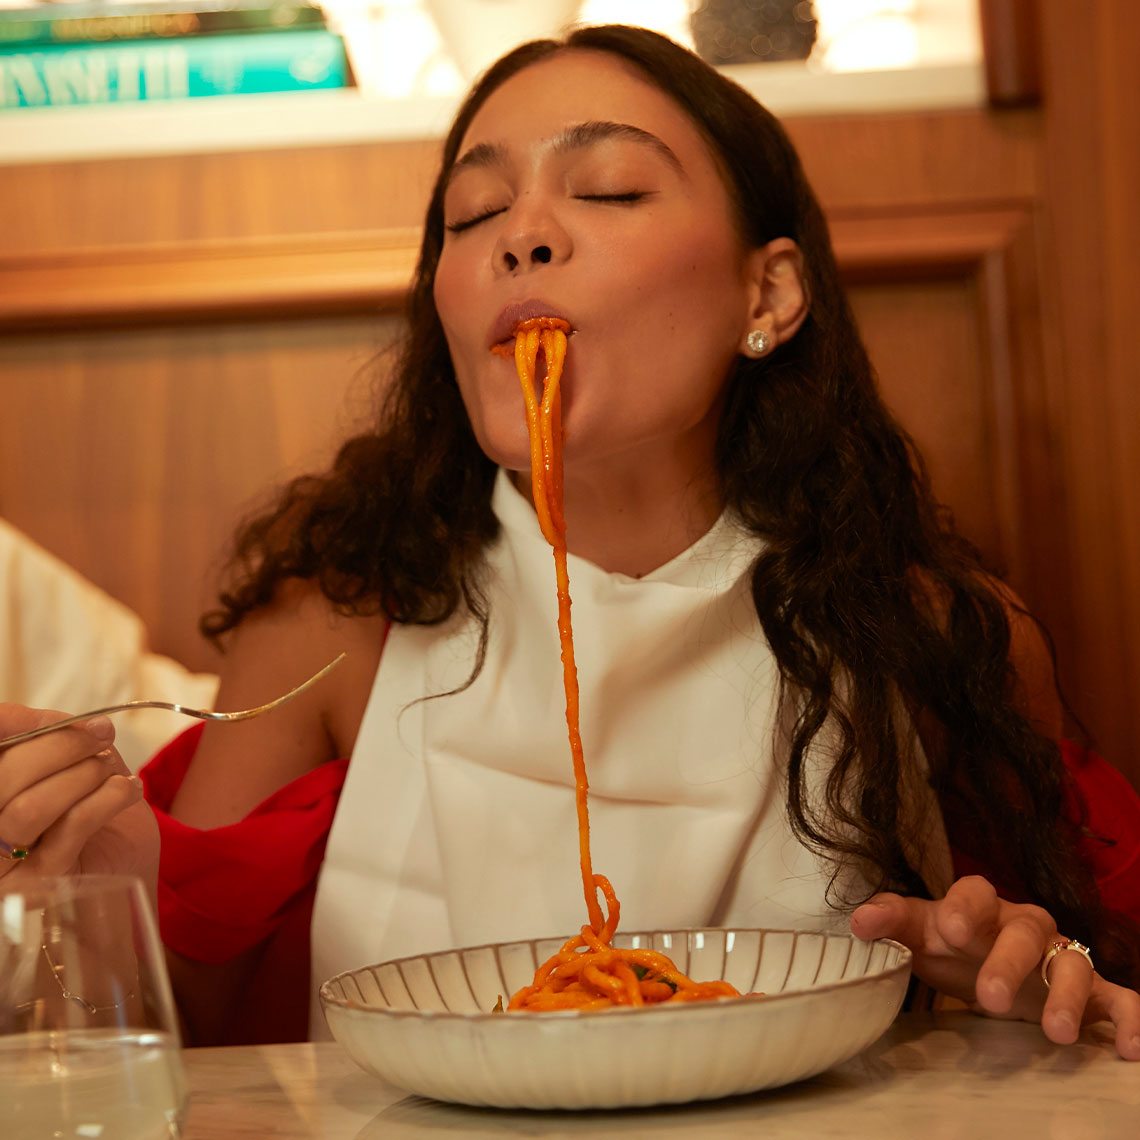 W Hotels Rome Destination Guide Girl Eating Pasta